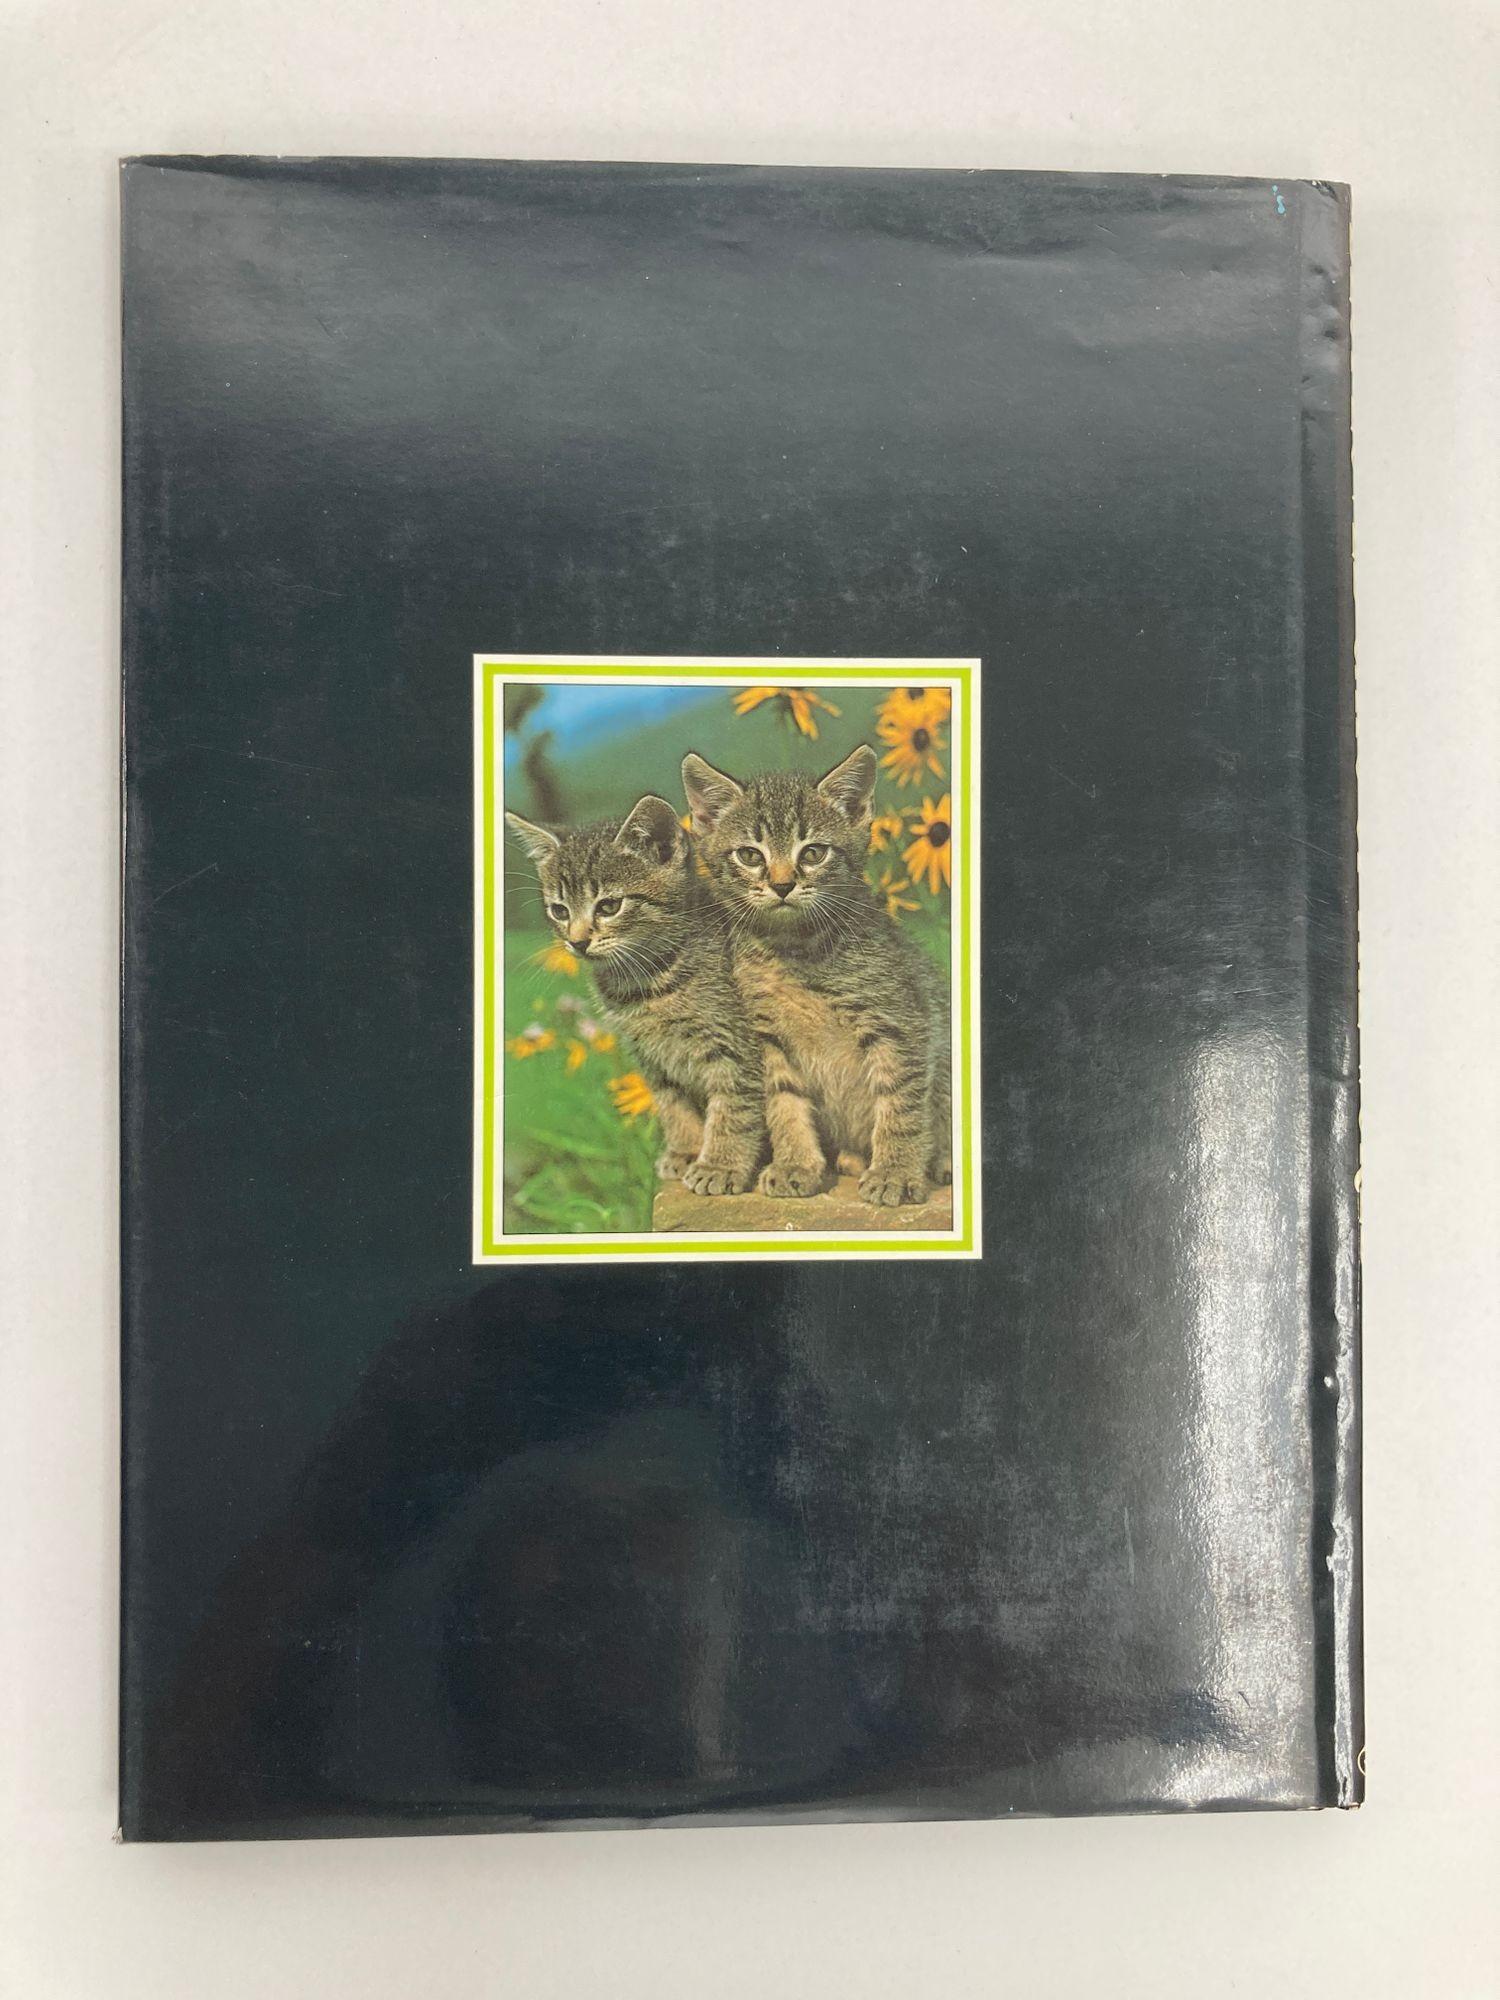 Best Loved Cats of the World Hardcover Book by Peter McHoy In Good Condition For Sale In North Hollywood, CA